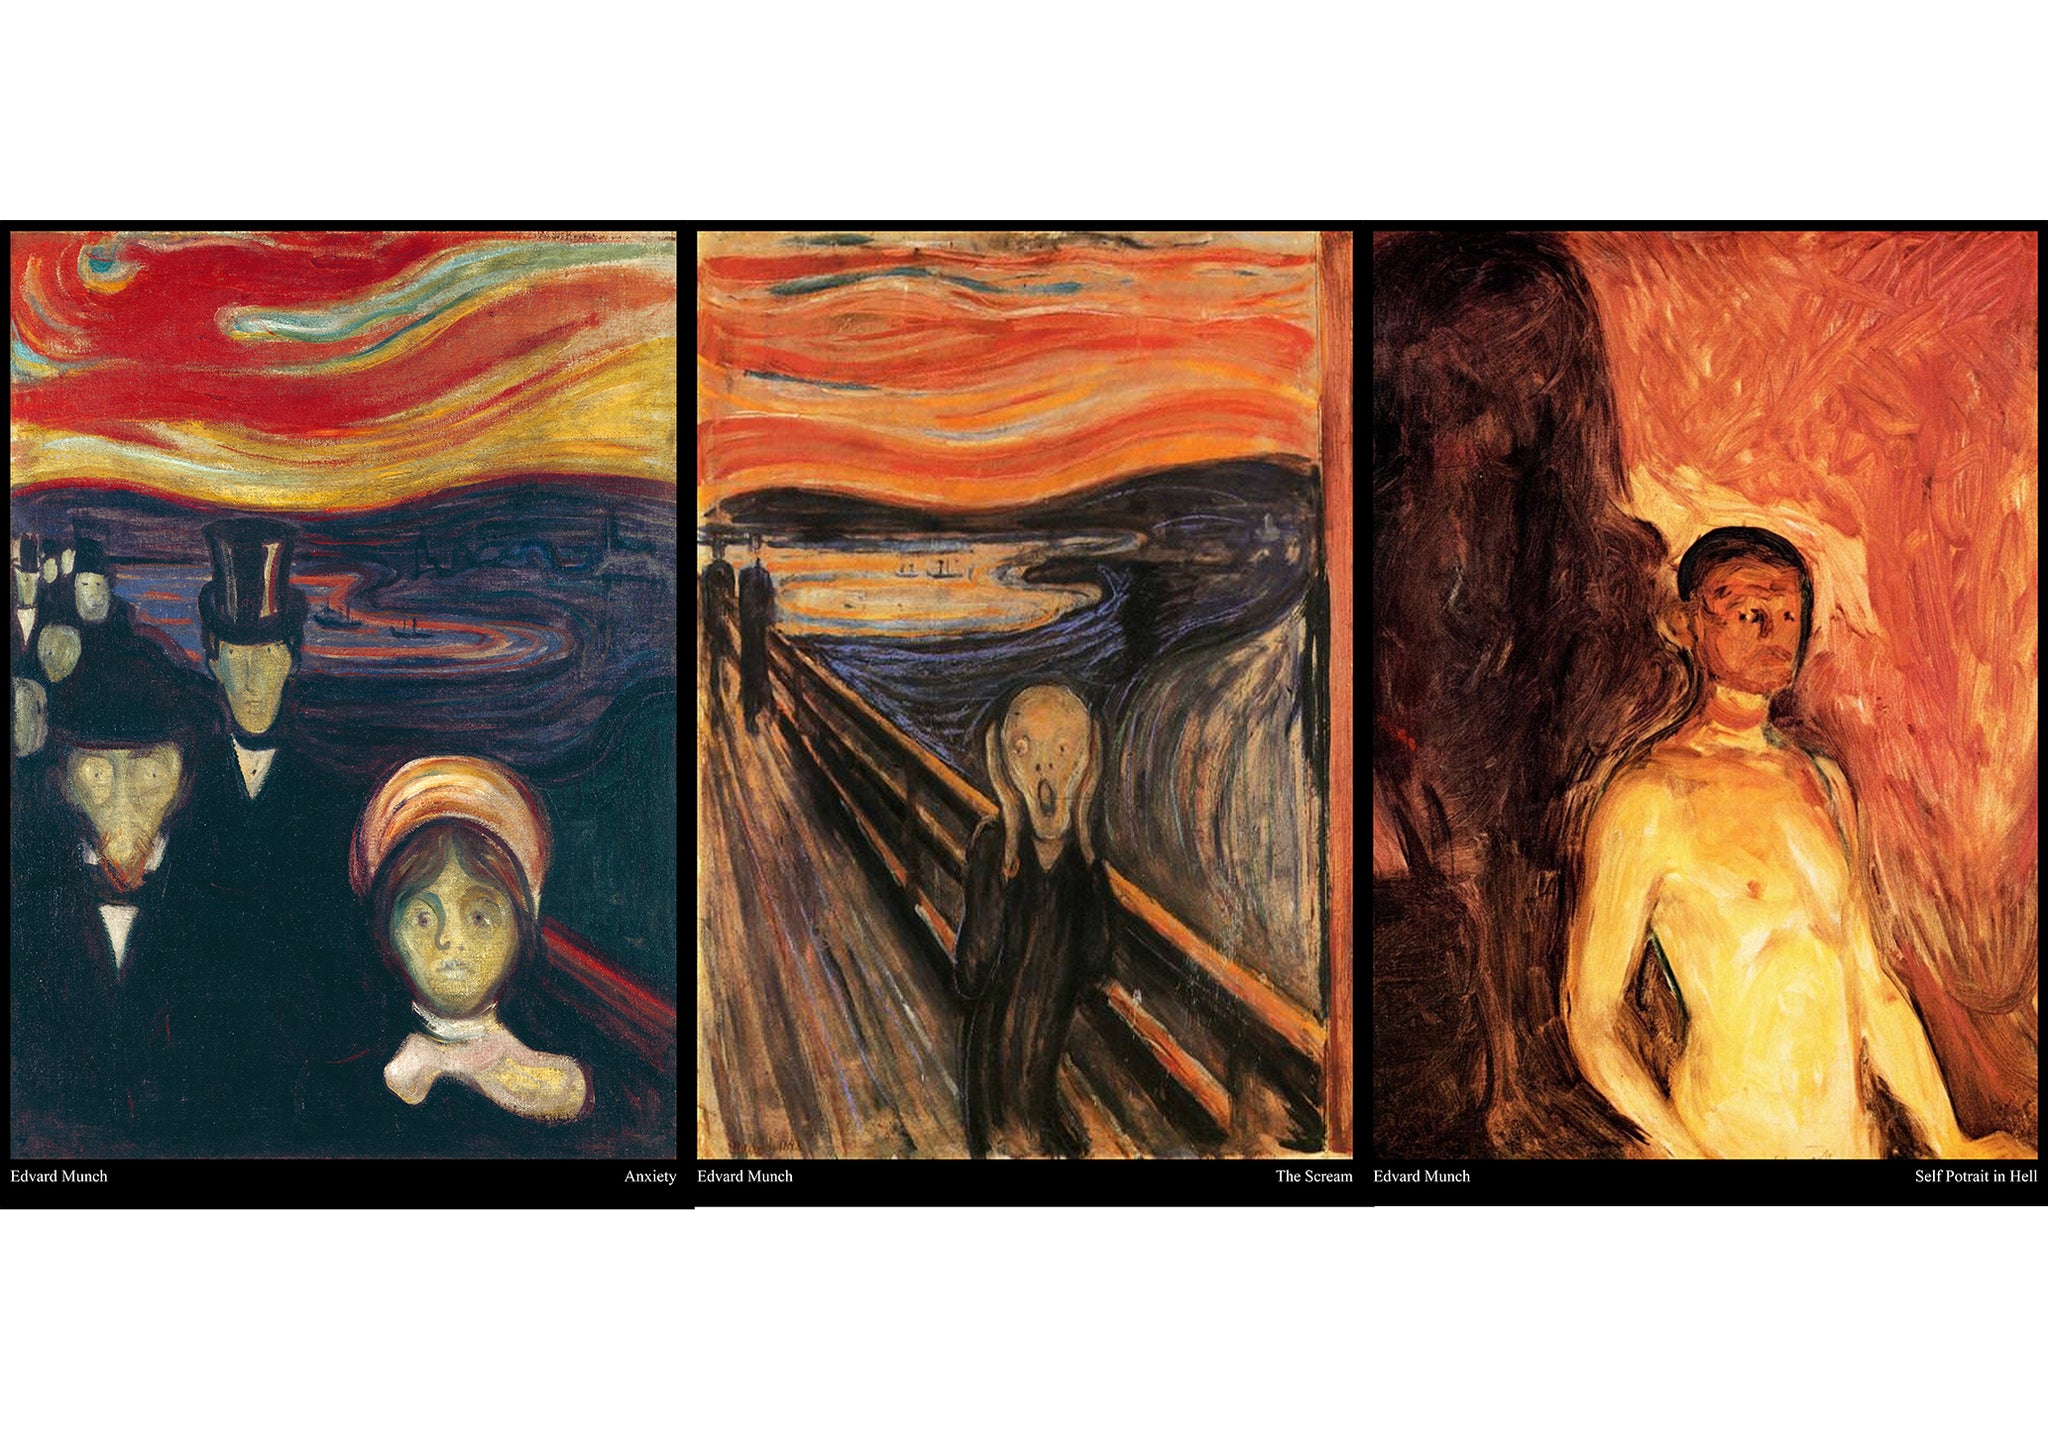 Edvard Munch: The Scream, Anxiety, Self Portrait in Hell - A3 Posters